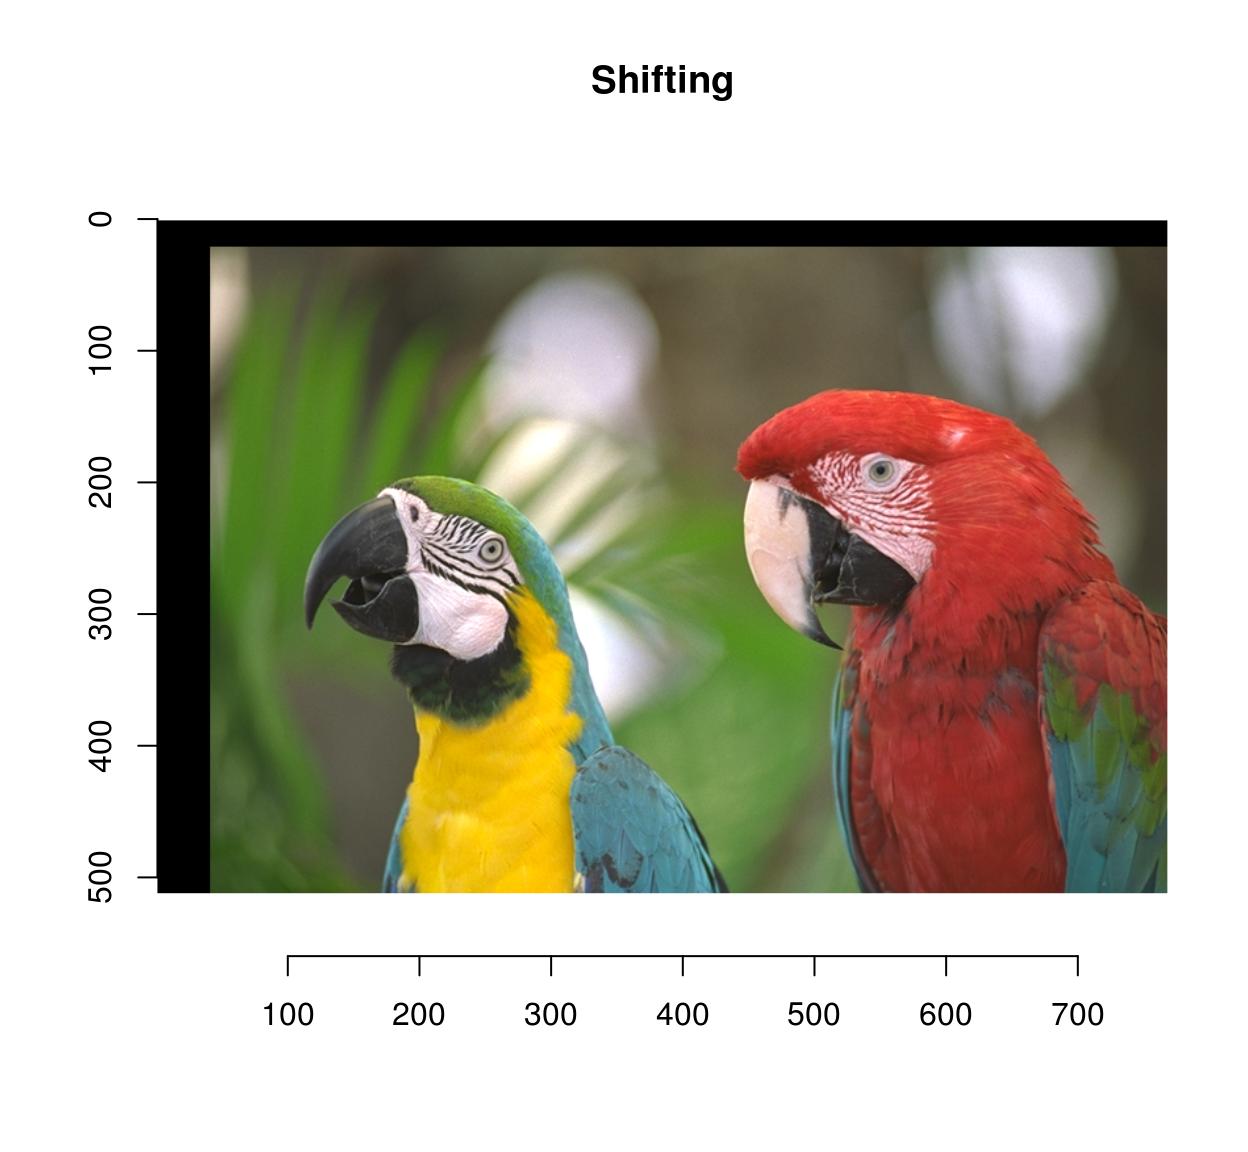 Imager An R Package For Image Processing